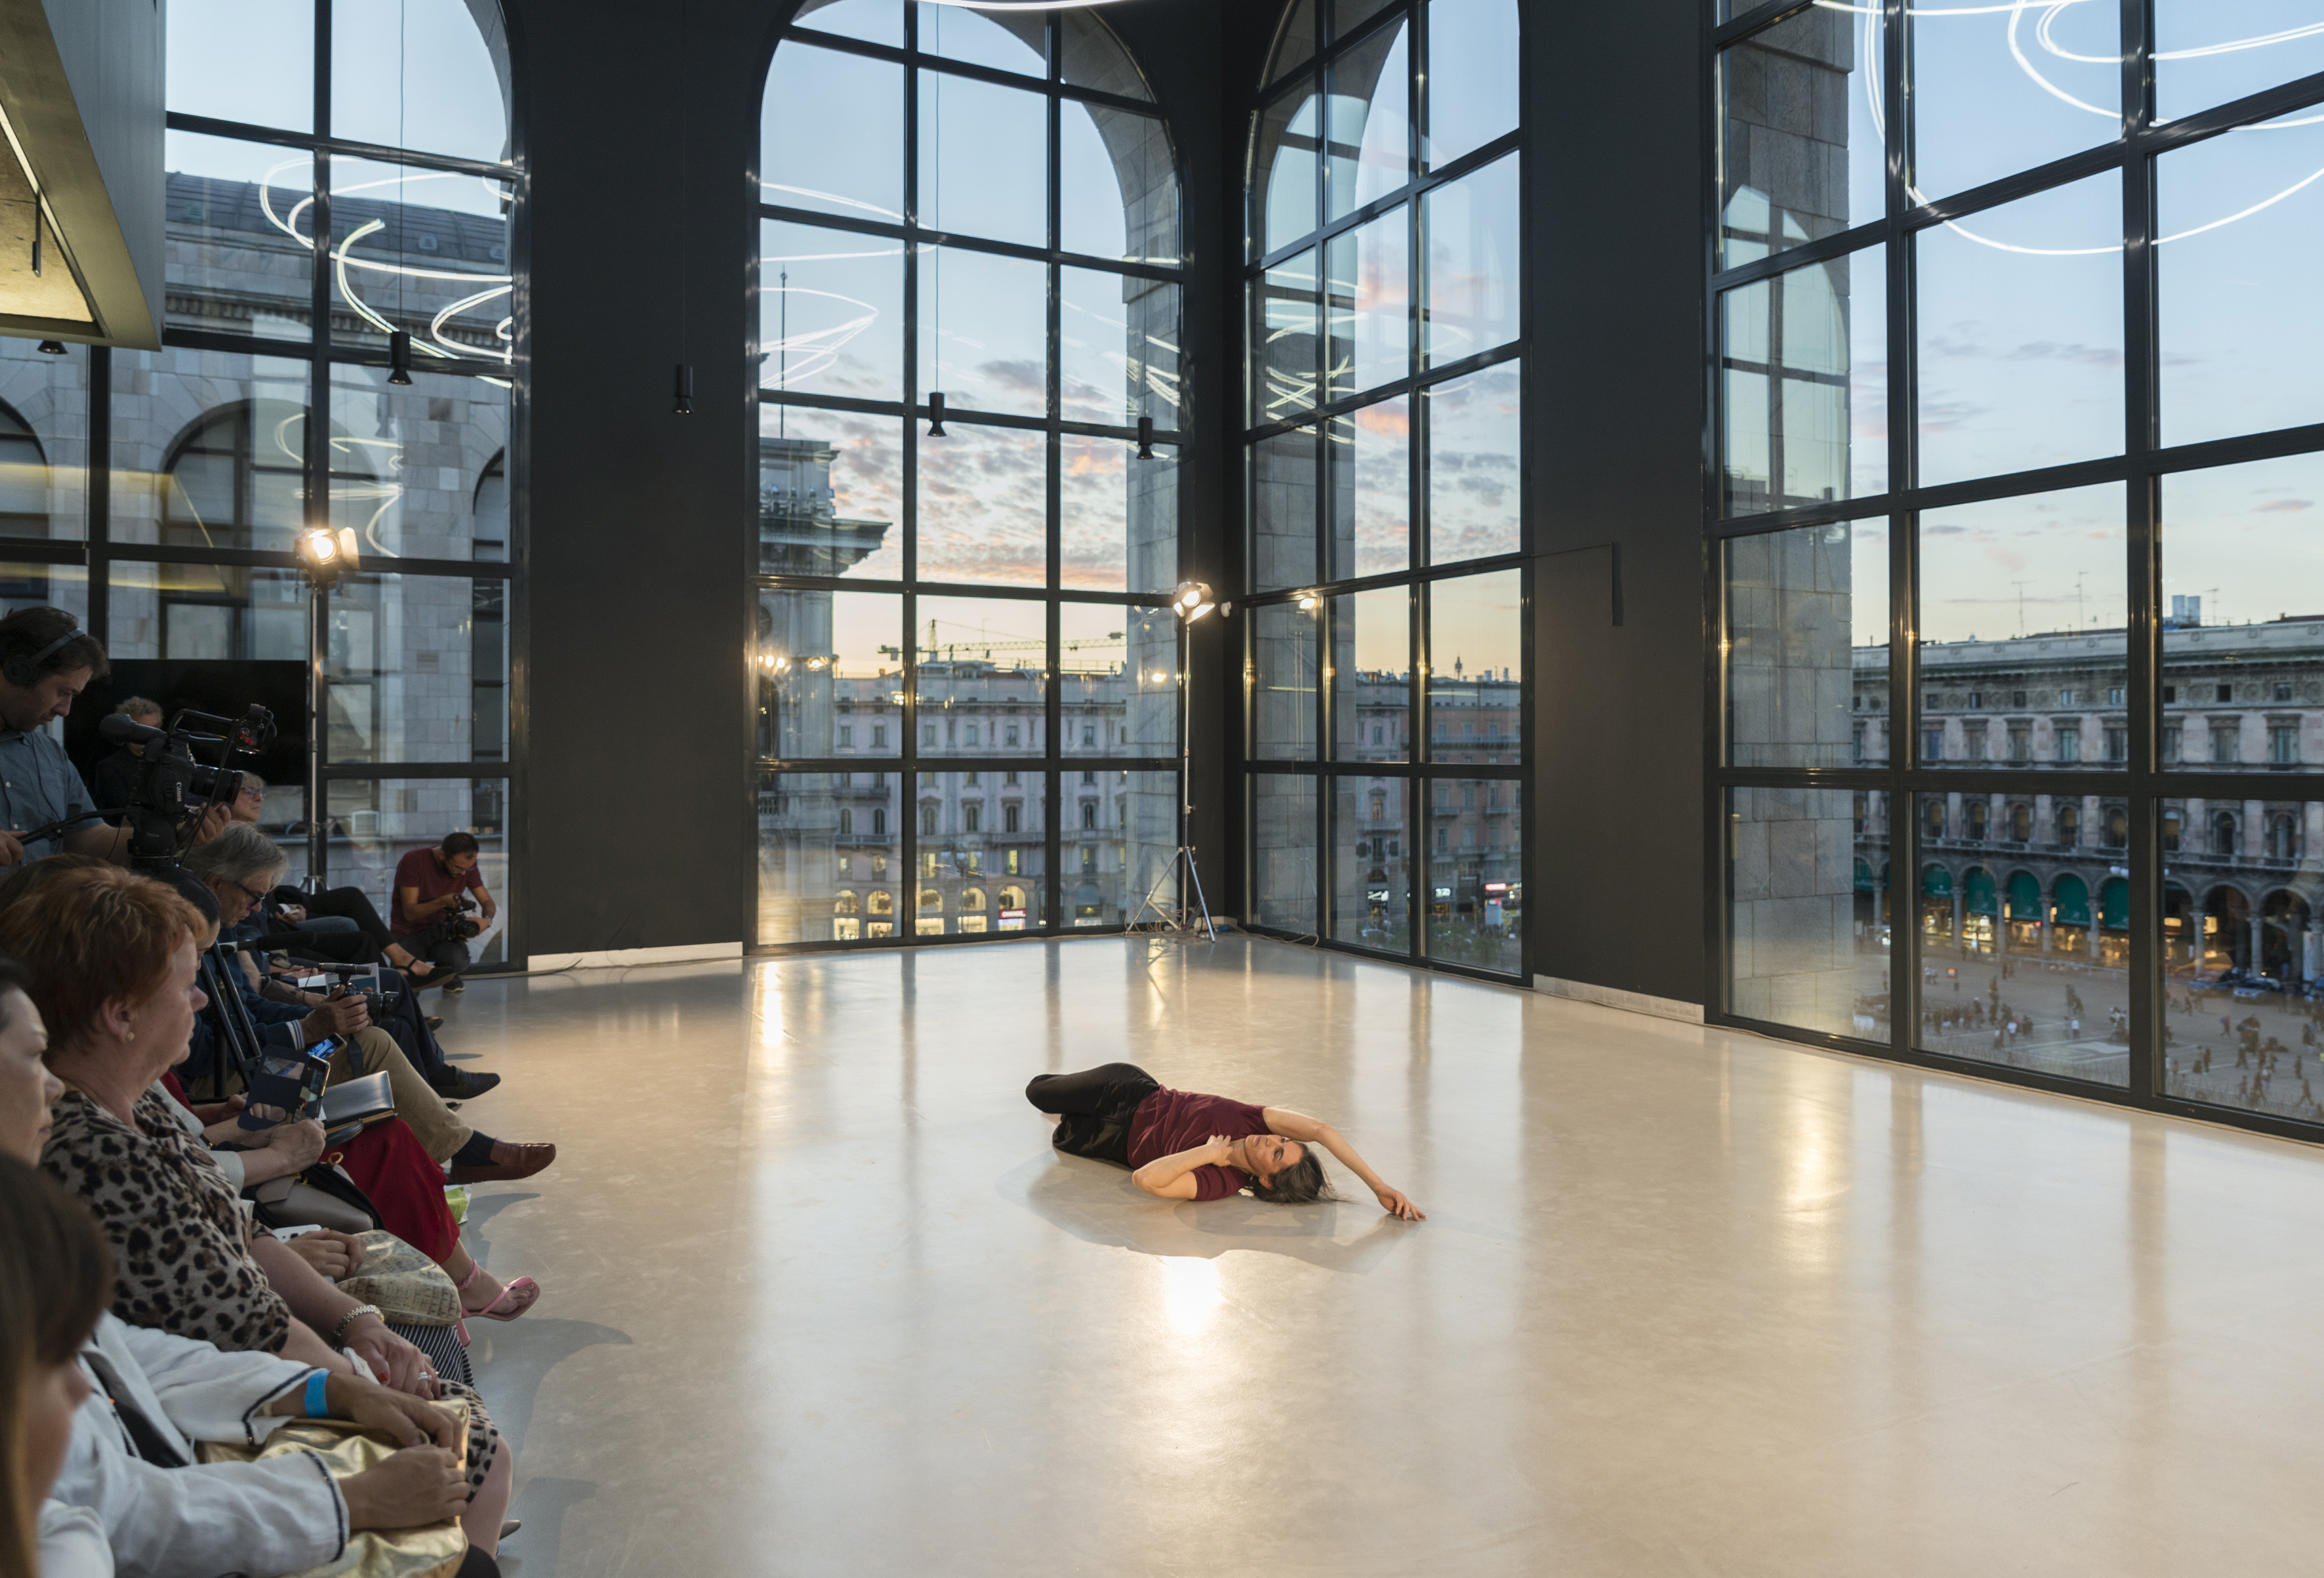 <em>Sleepwalkers</em>, 1968, performed at Museo del Novecento, Sala Fontana, Milan, 2017, in the framework of <em>Furla Series - Time after Time, Space after Space</em>. Courtesy the artist and The Box, Los Angeles. Photo © Masiar Pasquali